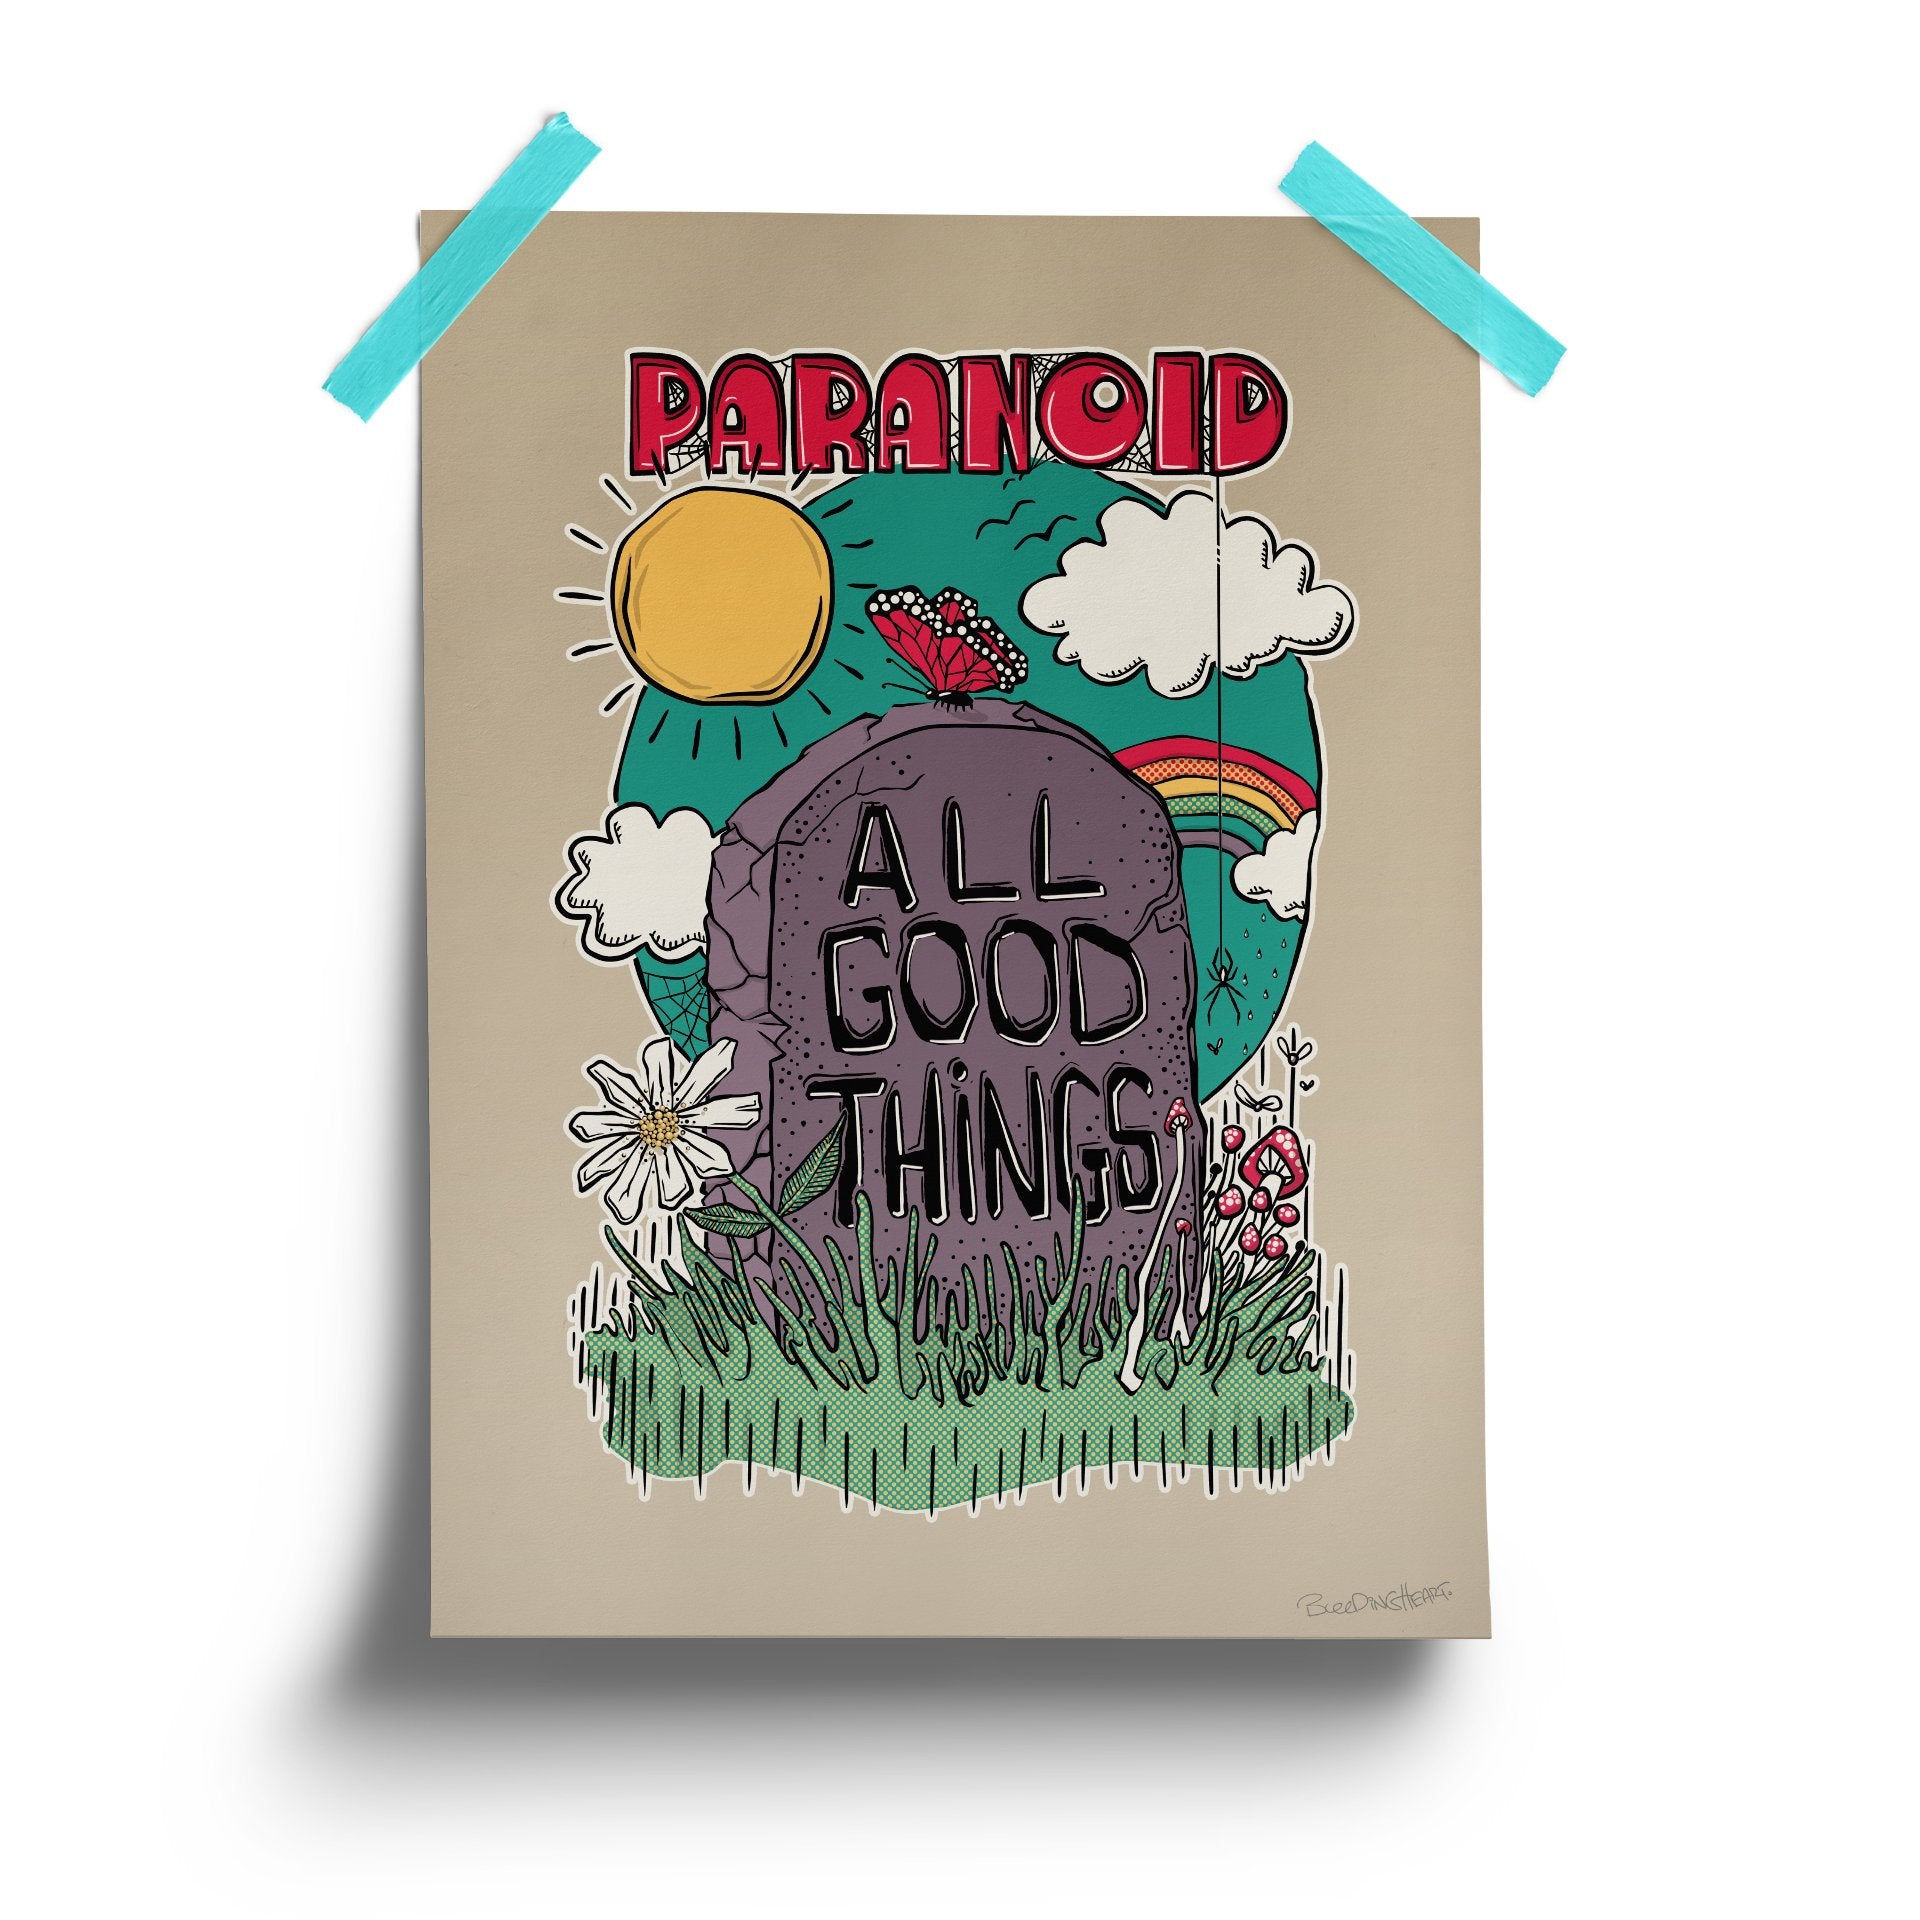 GOOD THINGS POSTER